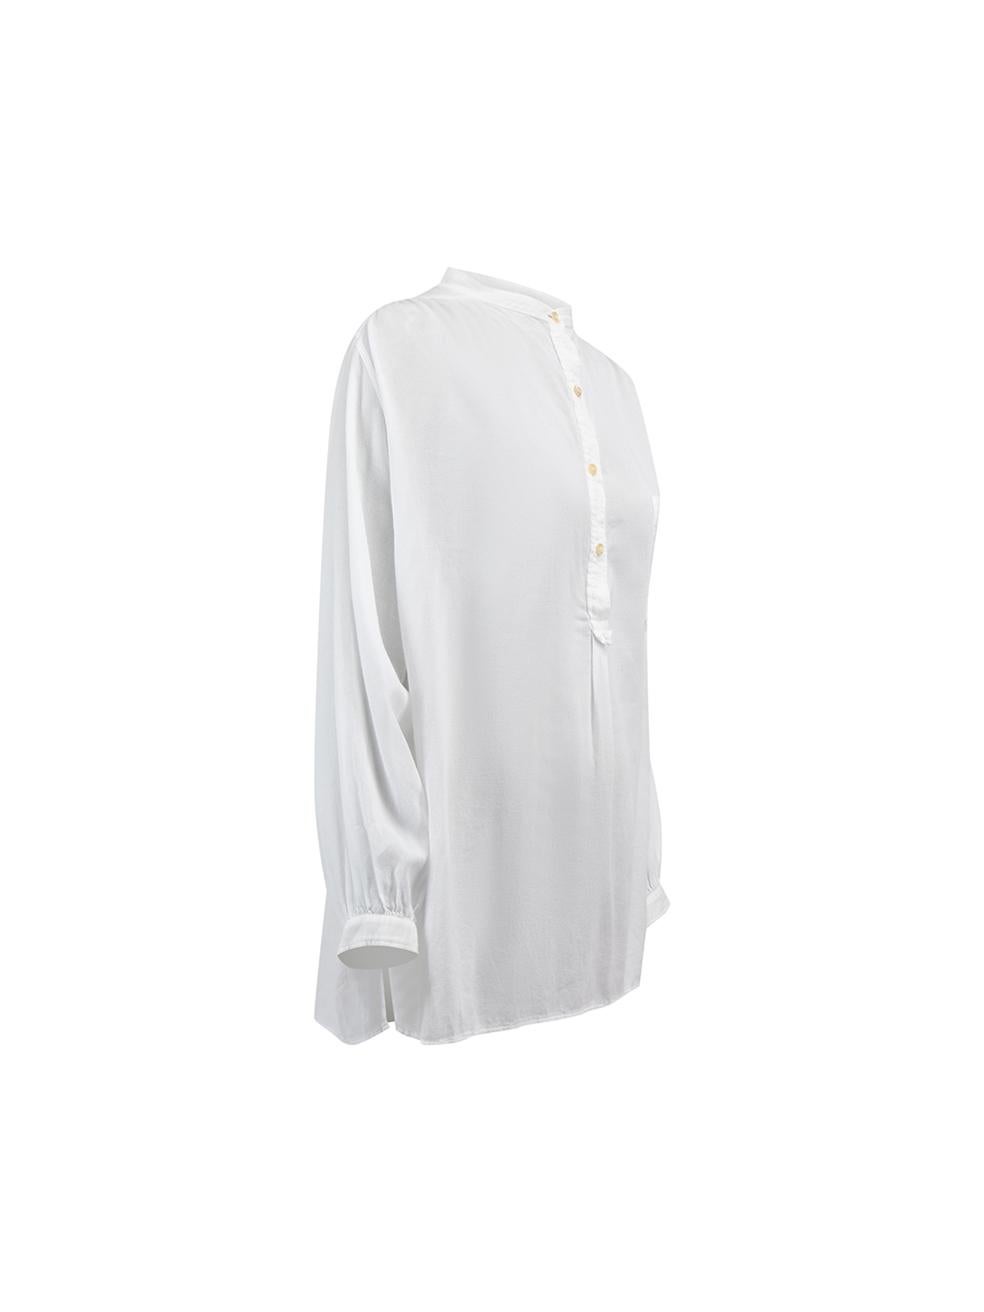 CONDITION is Very good. Hardly any visible wear to shirt is evident on this used Isabel Marant Etoile designer resale item.



Details


White

Viscose

Shirt

Long sleeves

Half button up fastening

1x Button on each cuff

Front patch